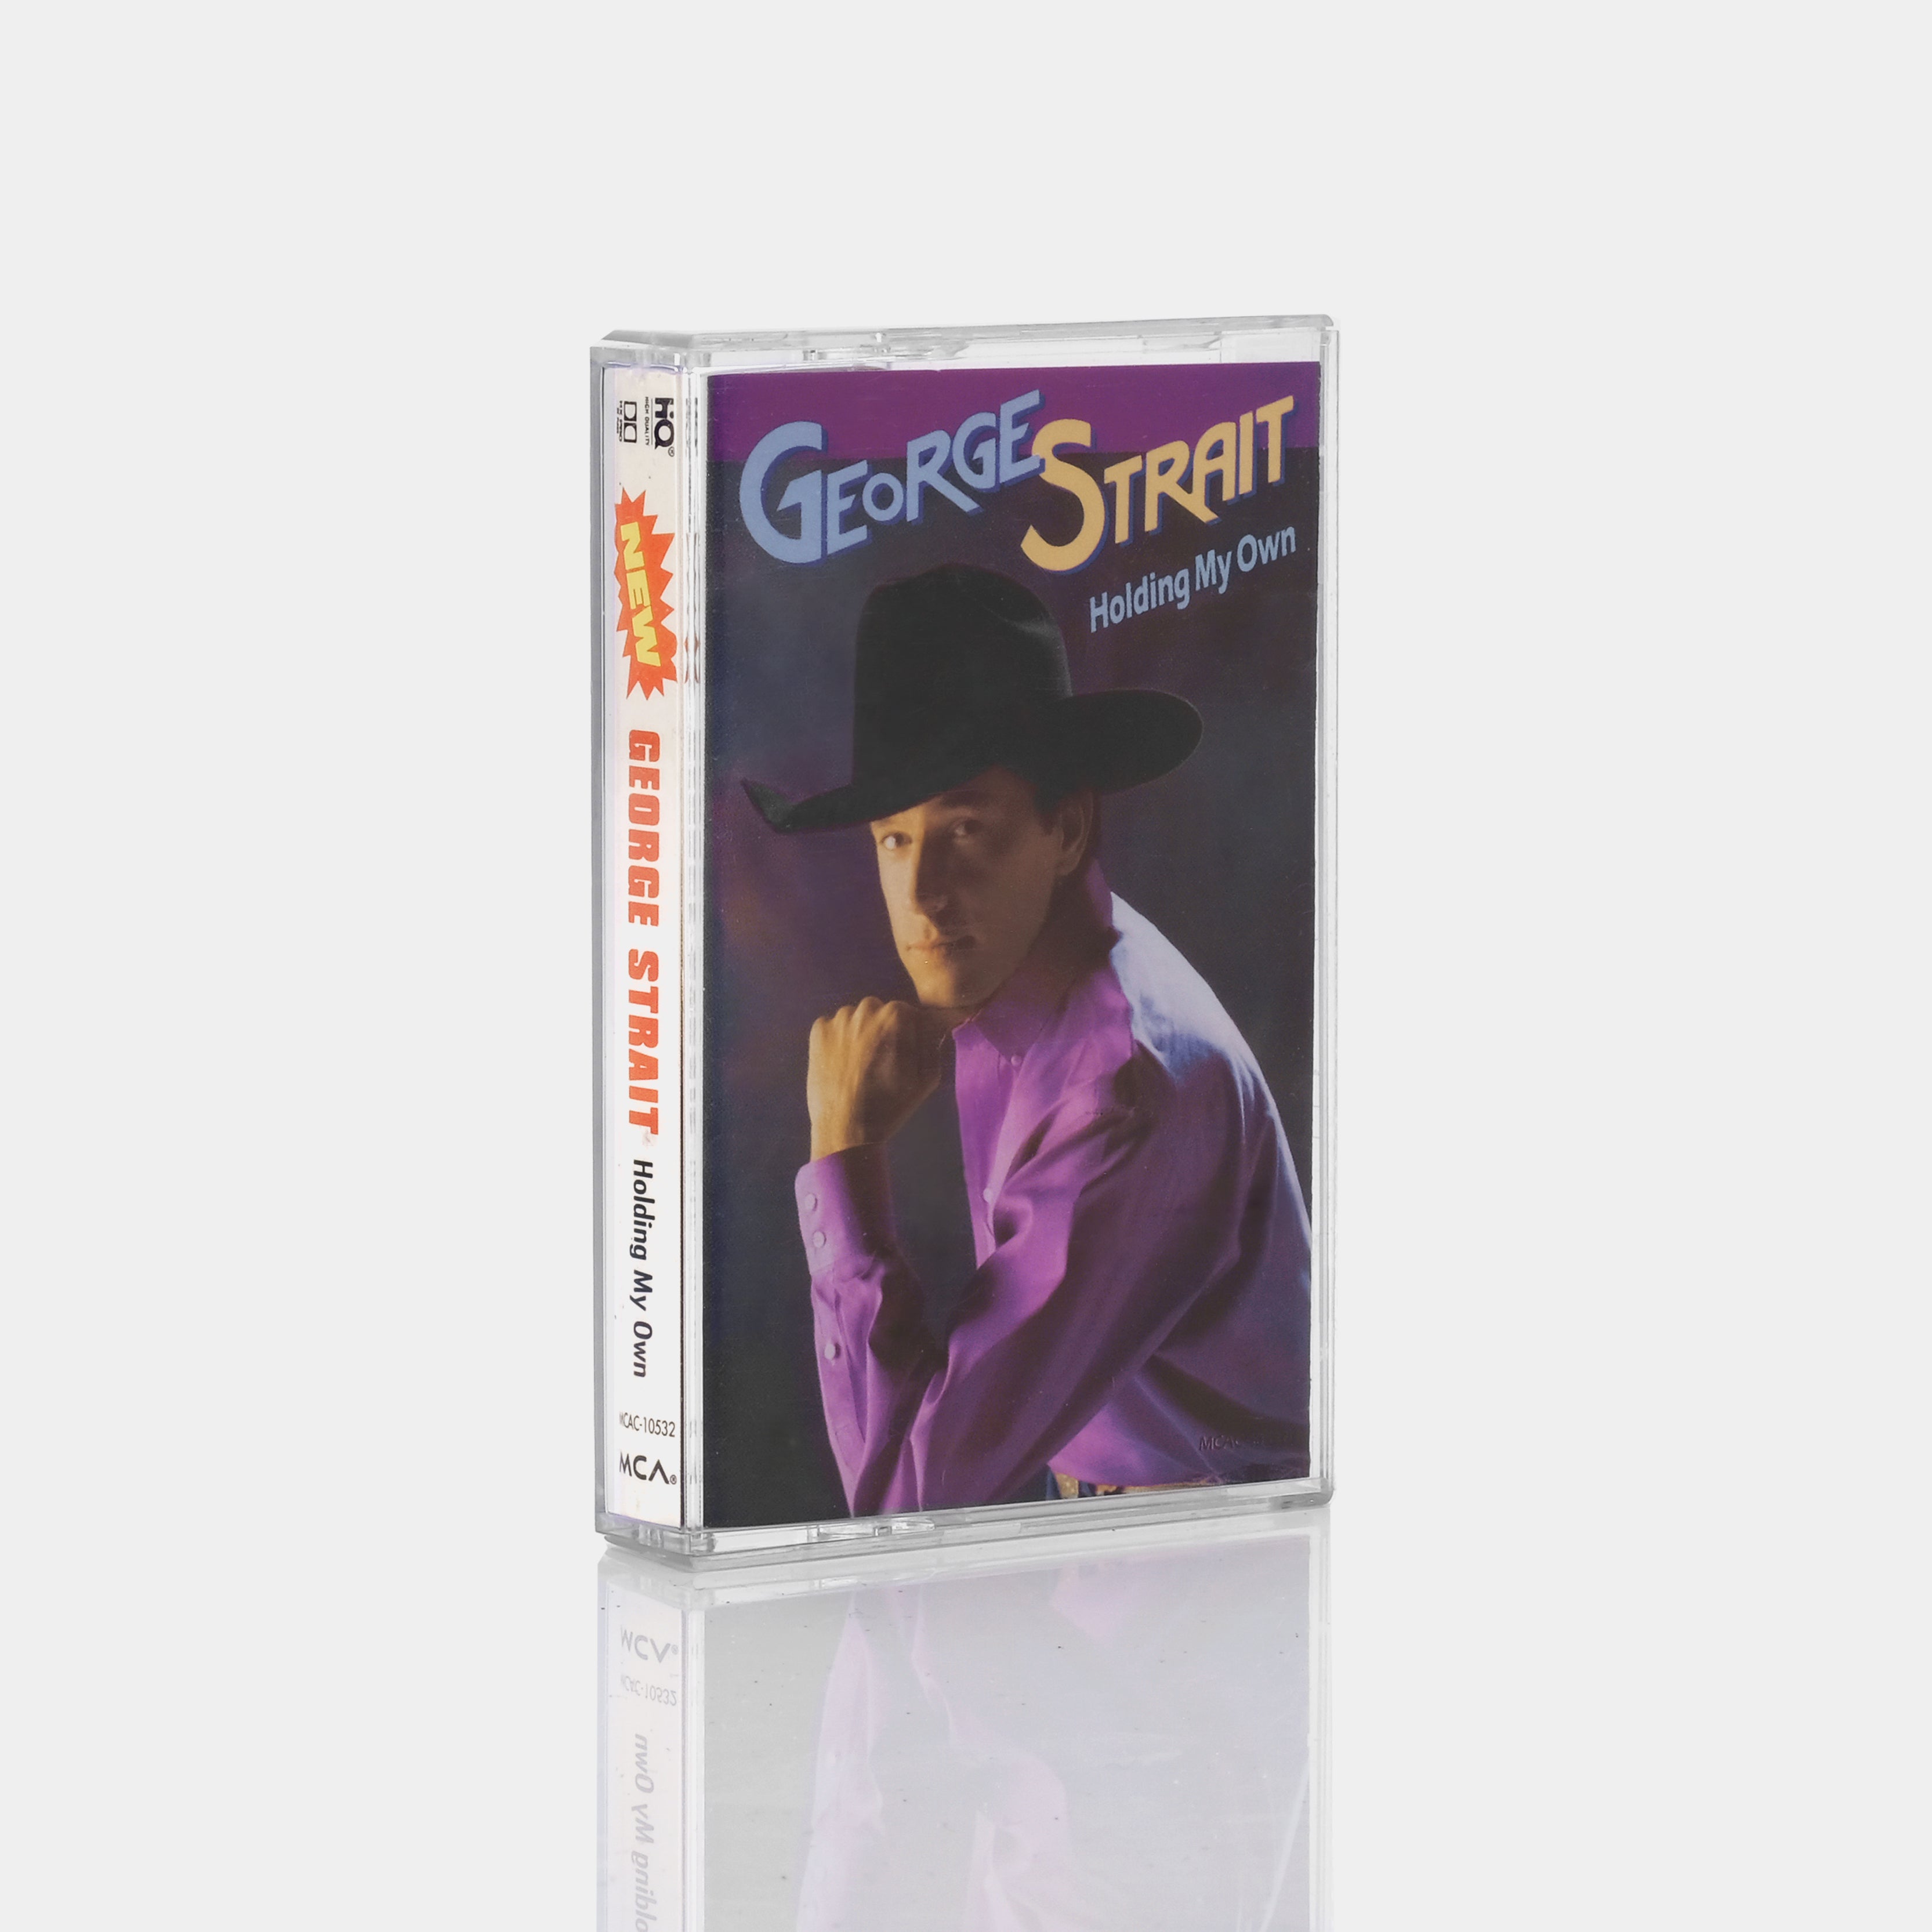 George Strait - Holding My Own Cassette Tape